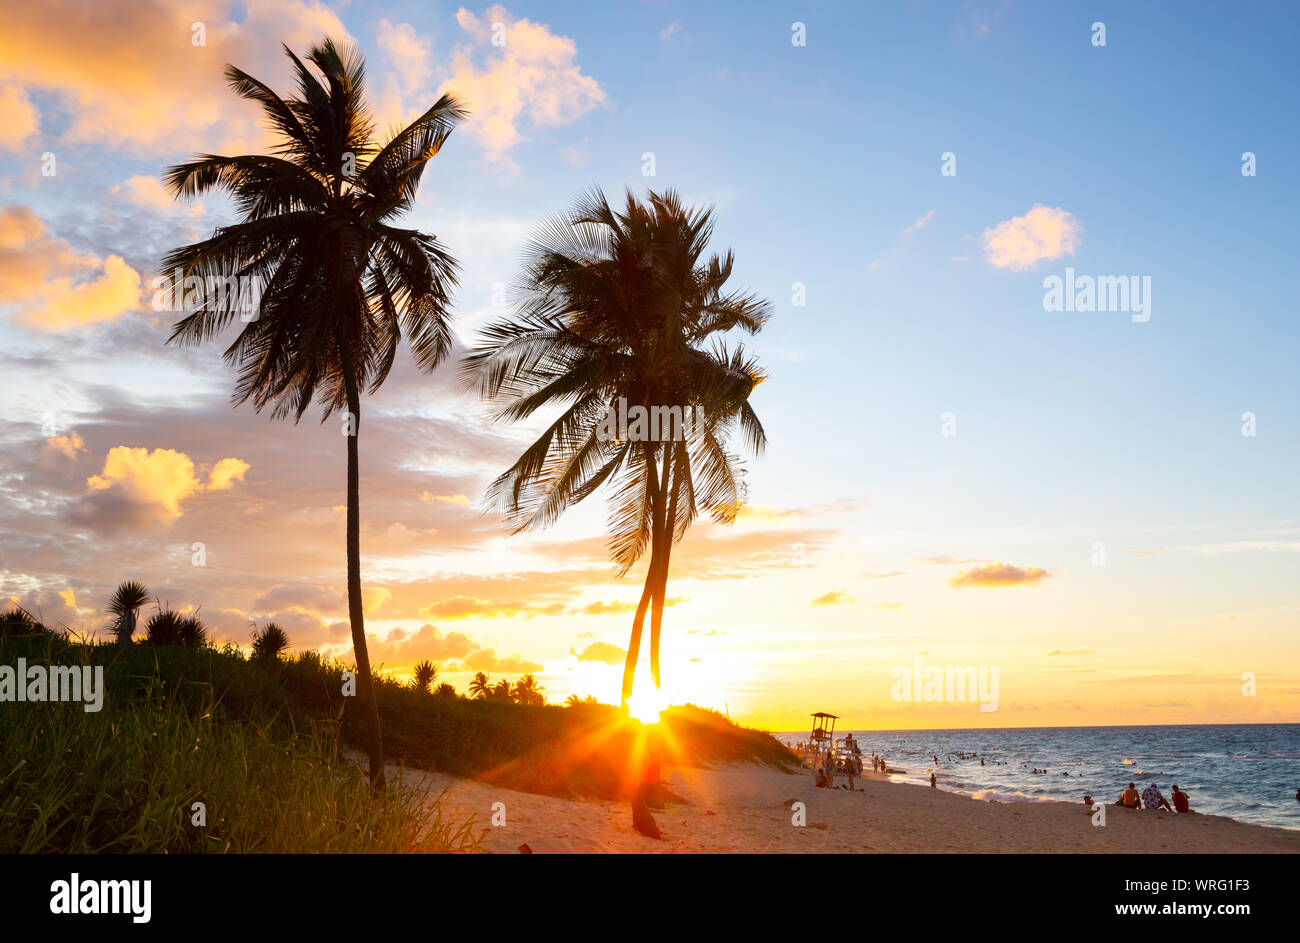 Warm glow of the sunset along the Atlantic Ocean at a beach in Cuba Stock Photo